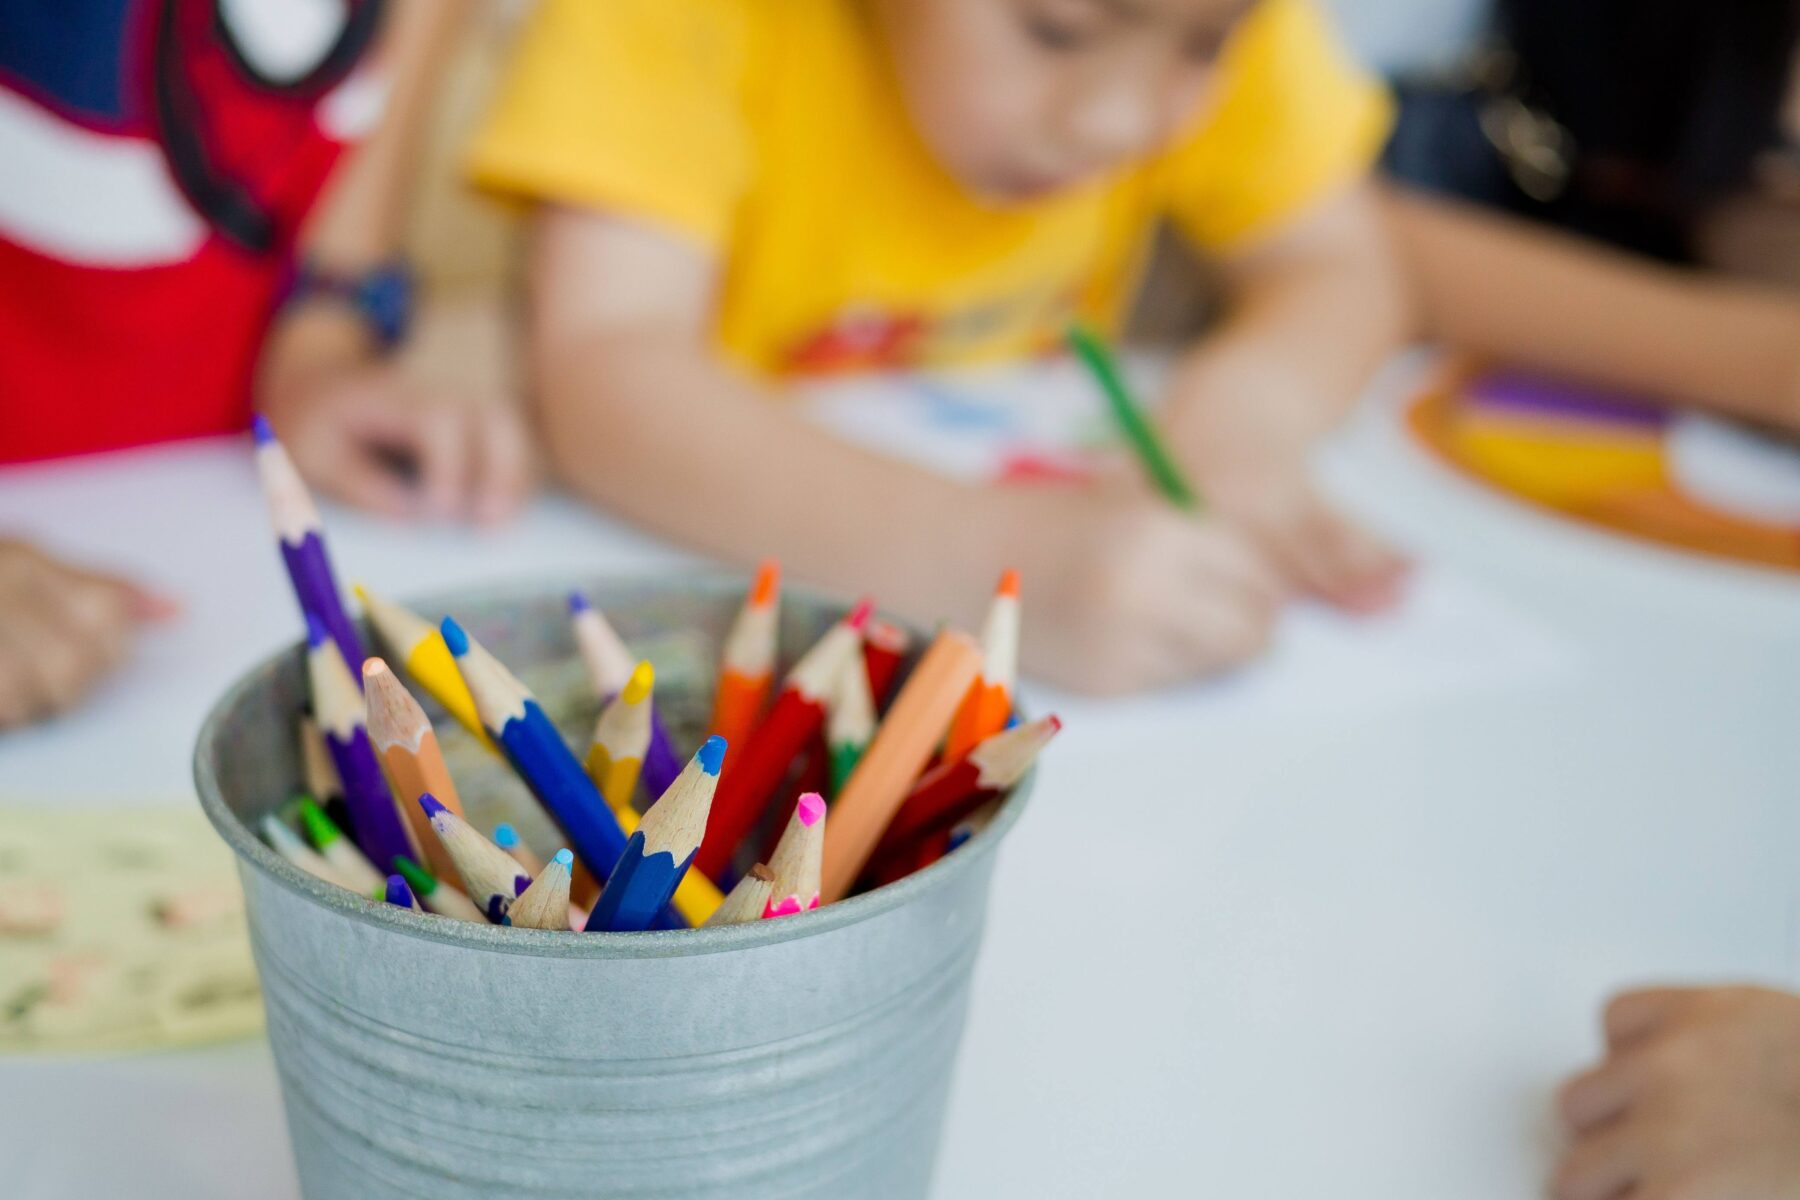 A Bucket of colored pencils sitting on a table, children coloring in the background